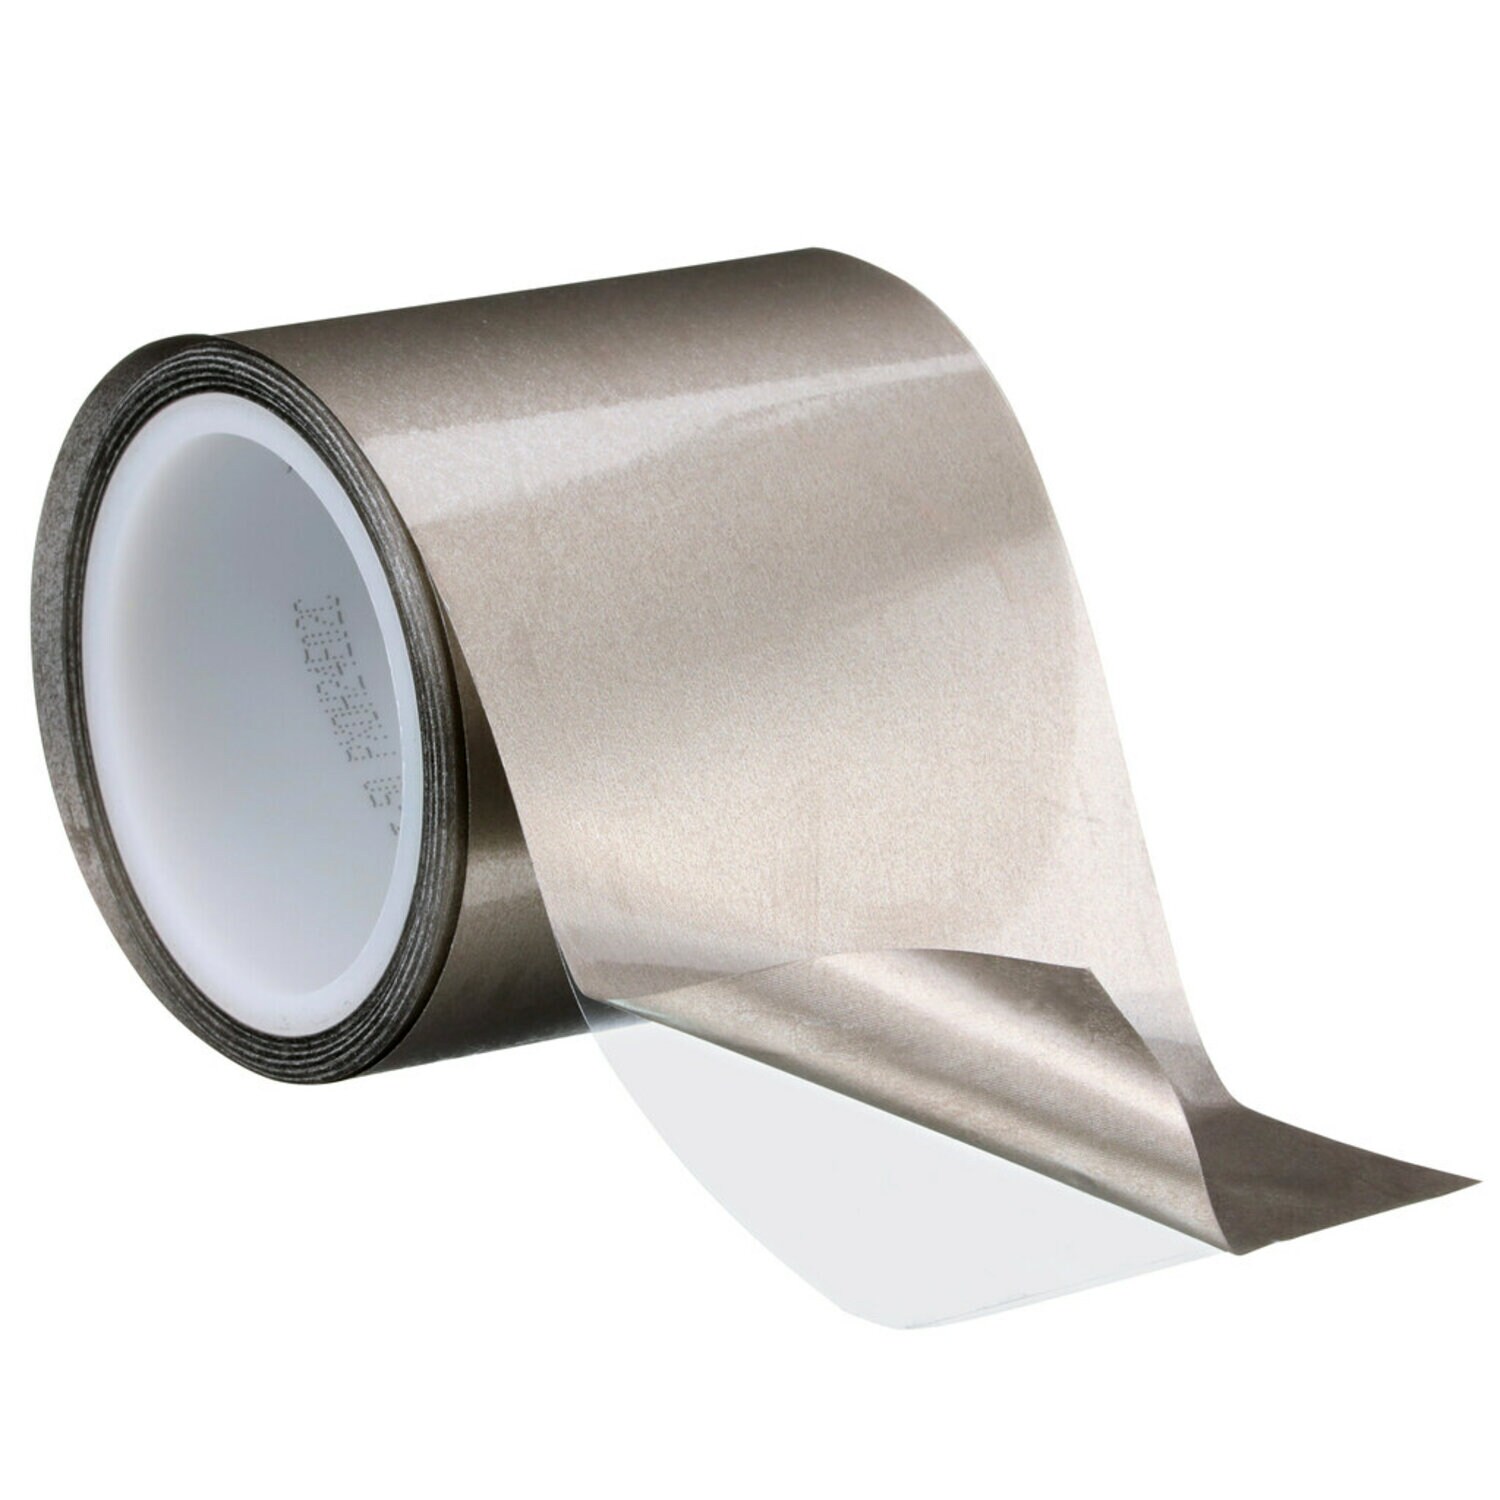 7100311679 - 3M Electrically Conductive Double-Sided Tape 5113DFT-50, 1080 mm x 120 m, 1 Roll/Case, Untrimmed